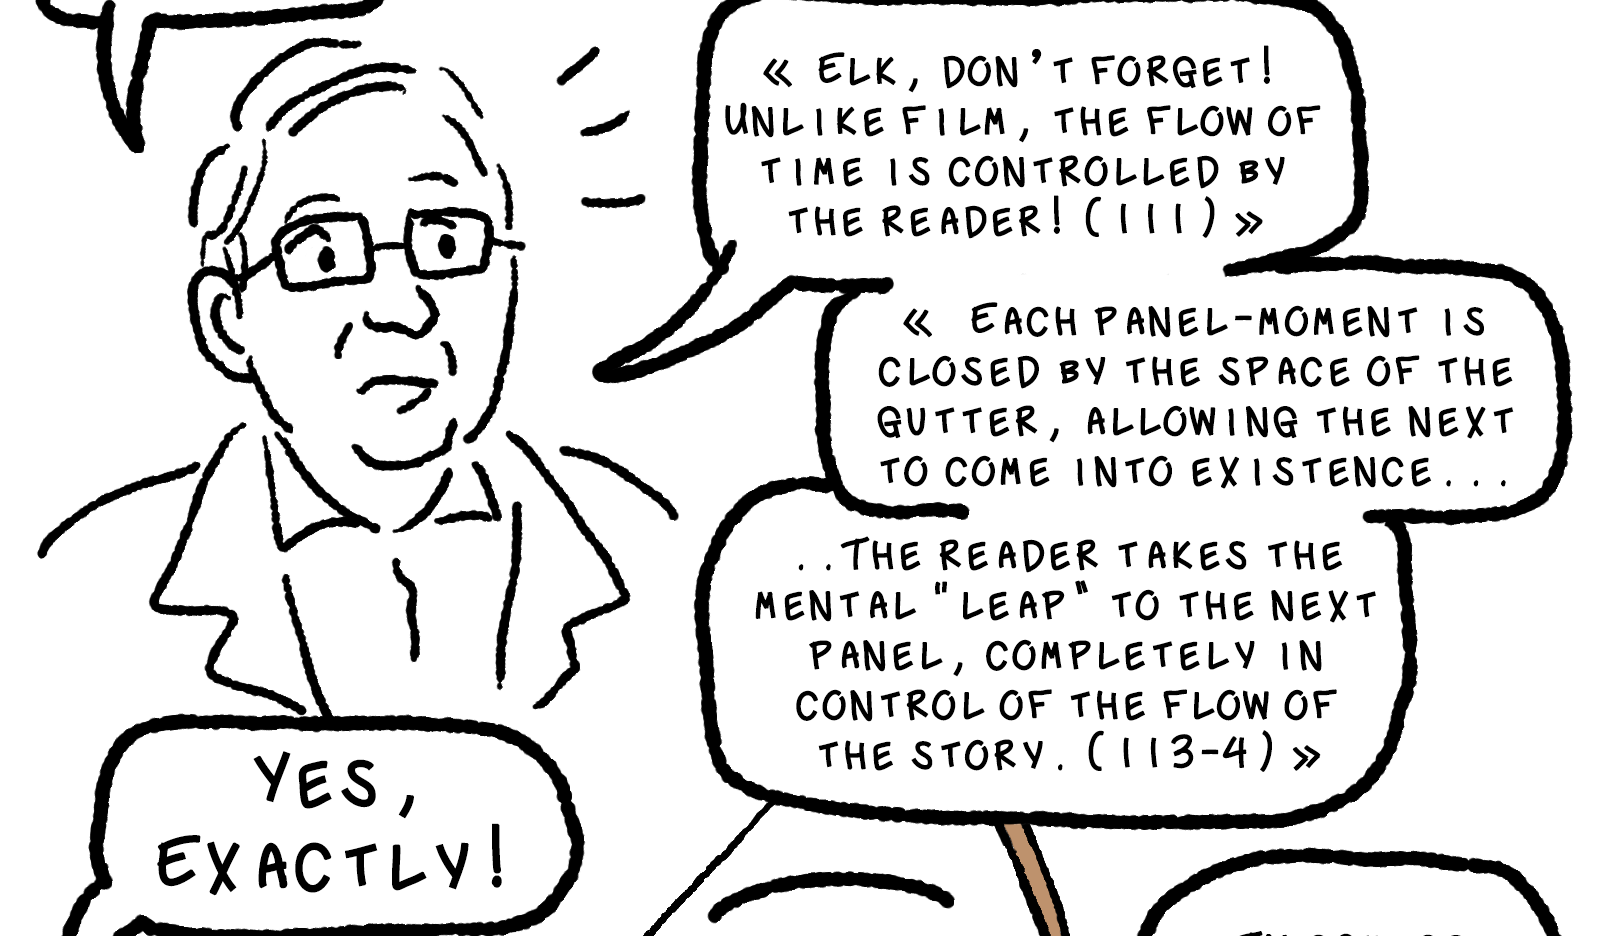 Thierry Groensteen intrudes, eyebrows raised. He says, MAIS-! which in French means BUT-! He continues in a series of small speech bubbles: «Elk, don't forget! Unlike film, the flow of time is controlled by the reader! (111)» «Each panel-moment is closed by the space of the gugger, allowing the next to come into existence... the reader takes the mental 'leap' to the next panel, completely in control of the flow of the story. (113-4)»